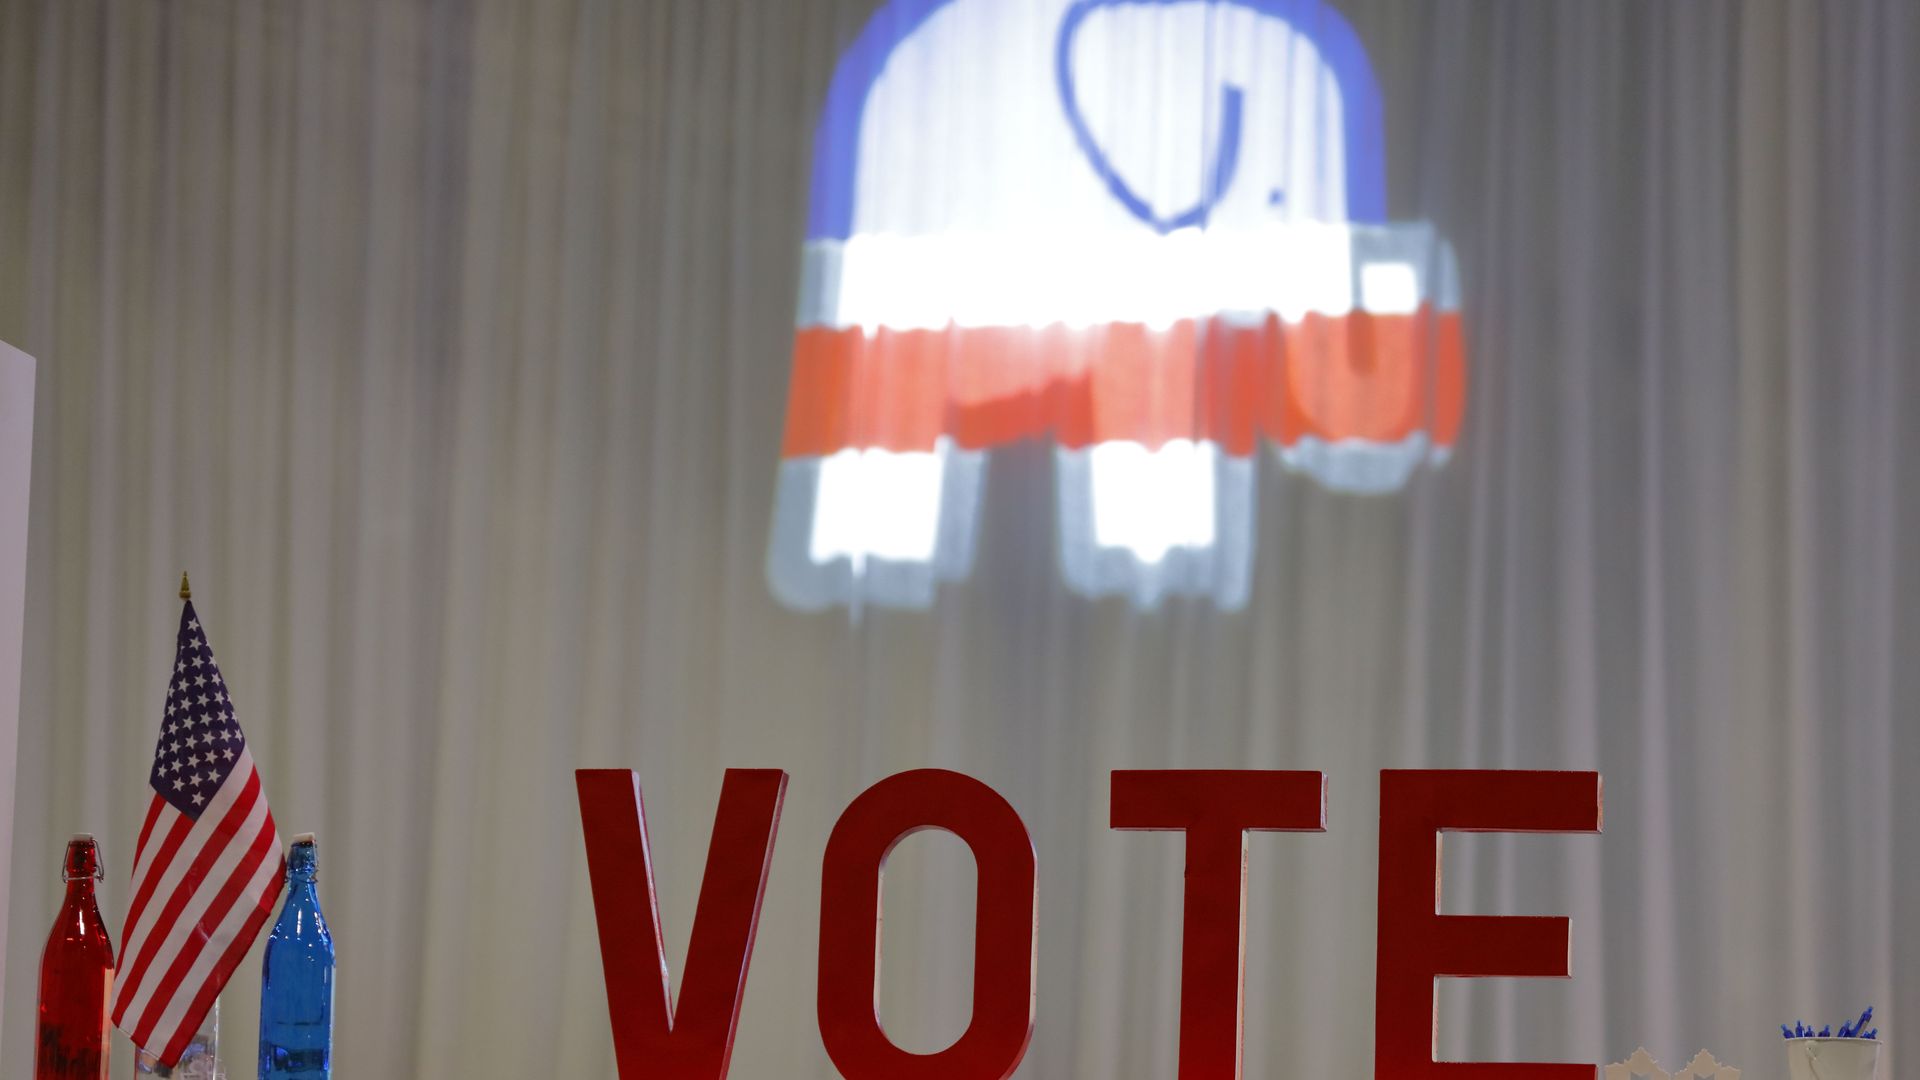 A Republicans elephant is lit up on a curtain behind a table that says VOTE 